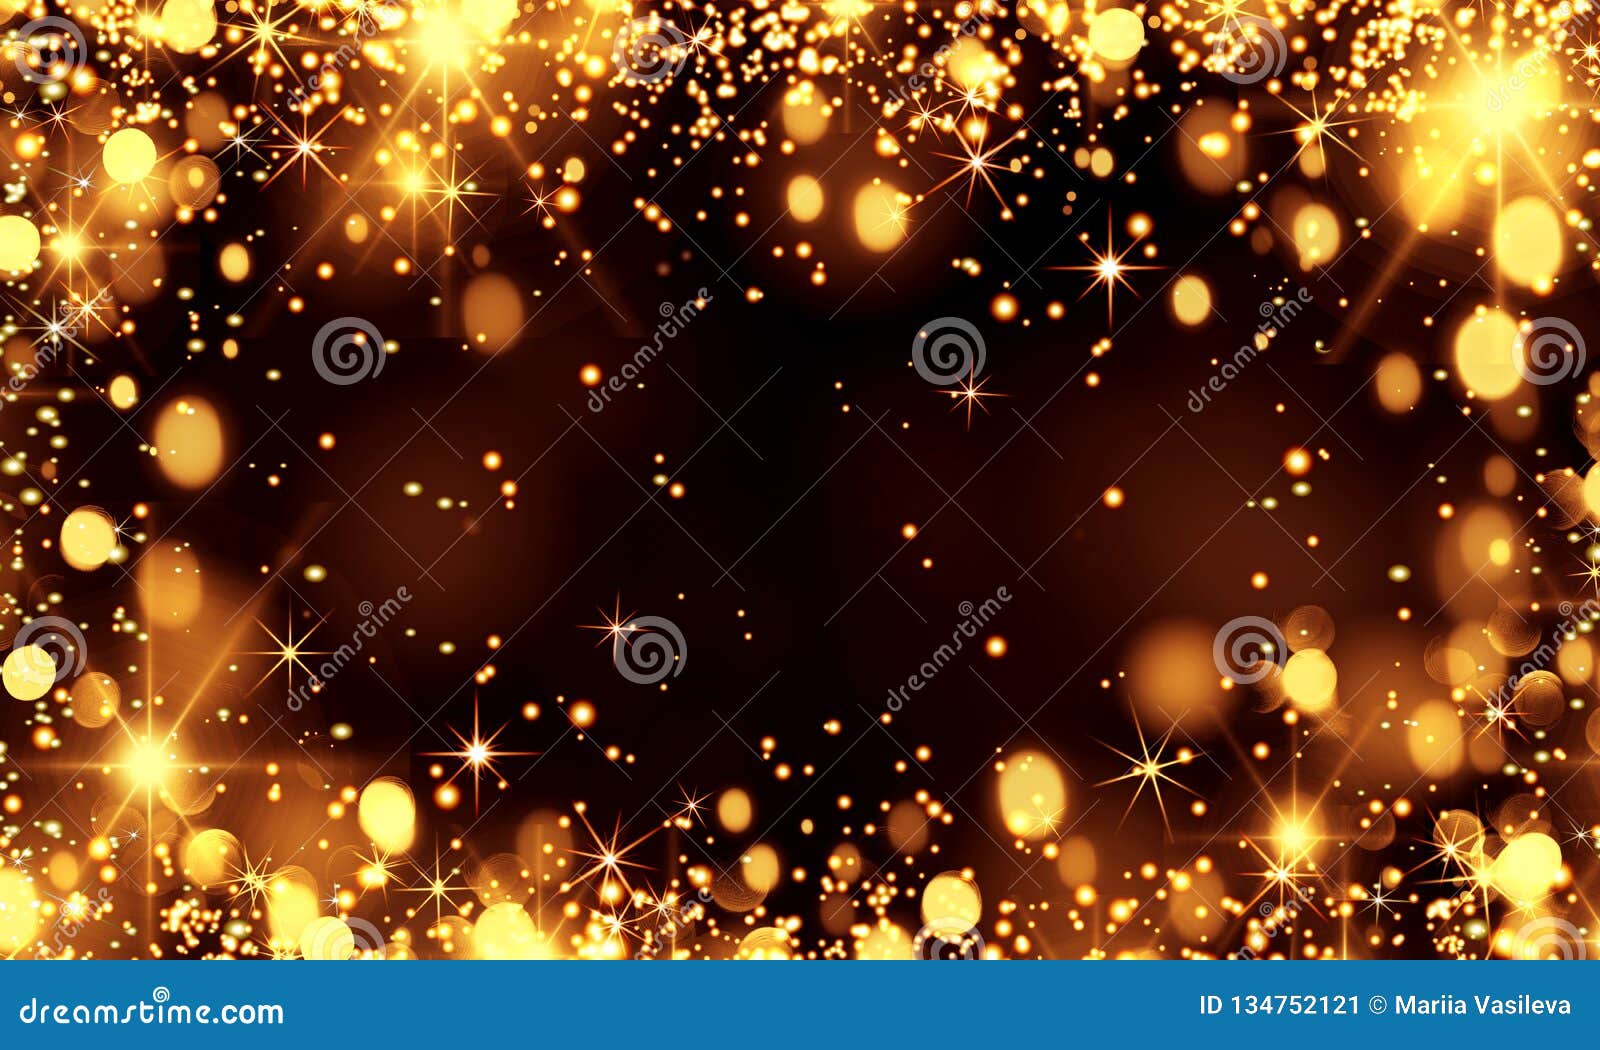 10x6.5ft Golden Bokeh Backdrop Dreamy Champagne Glitters Shiny Sparkles Photography Background Wallpaper Birthday Party Girls Adults Artistic Portrait Vlogger Blogger Studio Video Props 